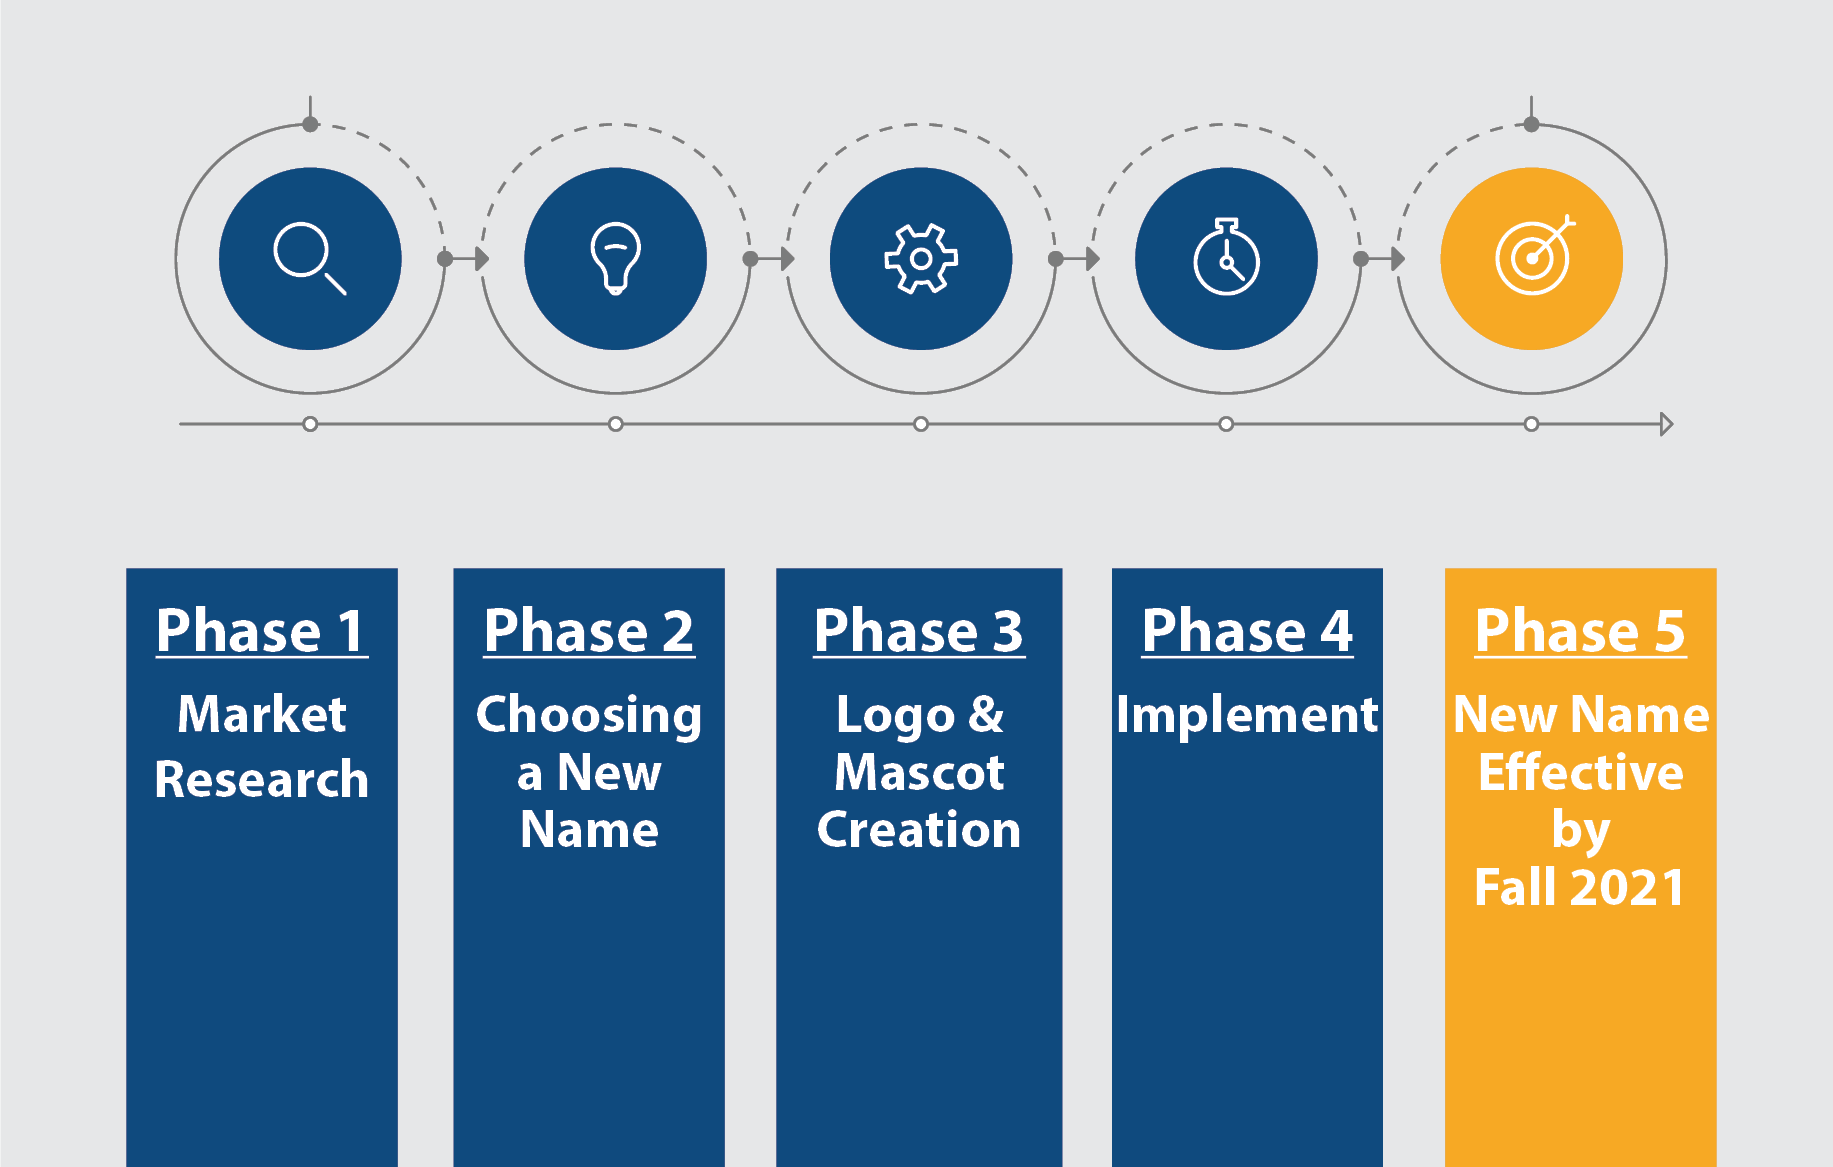 The five phases of the WITC name change project, highlighting that Northwood Tech is in the final phase